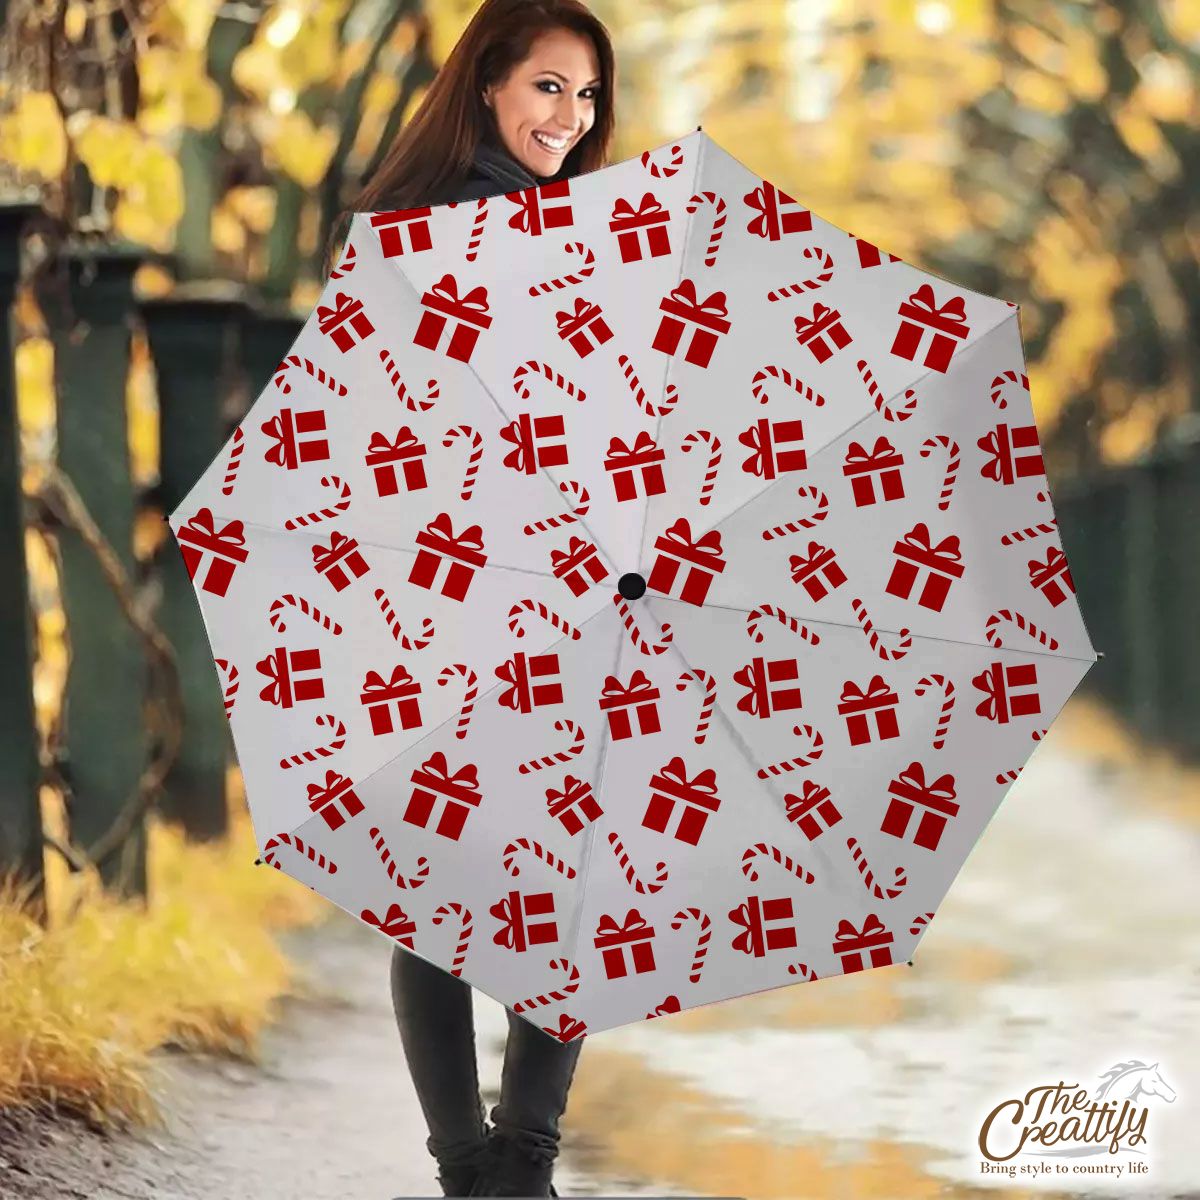 Christmas Gifts And Candy Canes Seamless White Pattern Umbrella